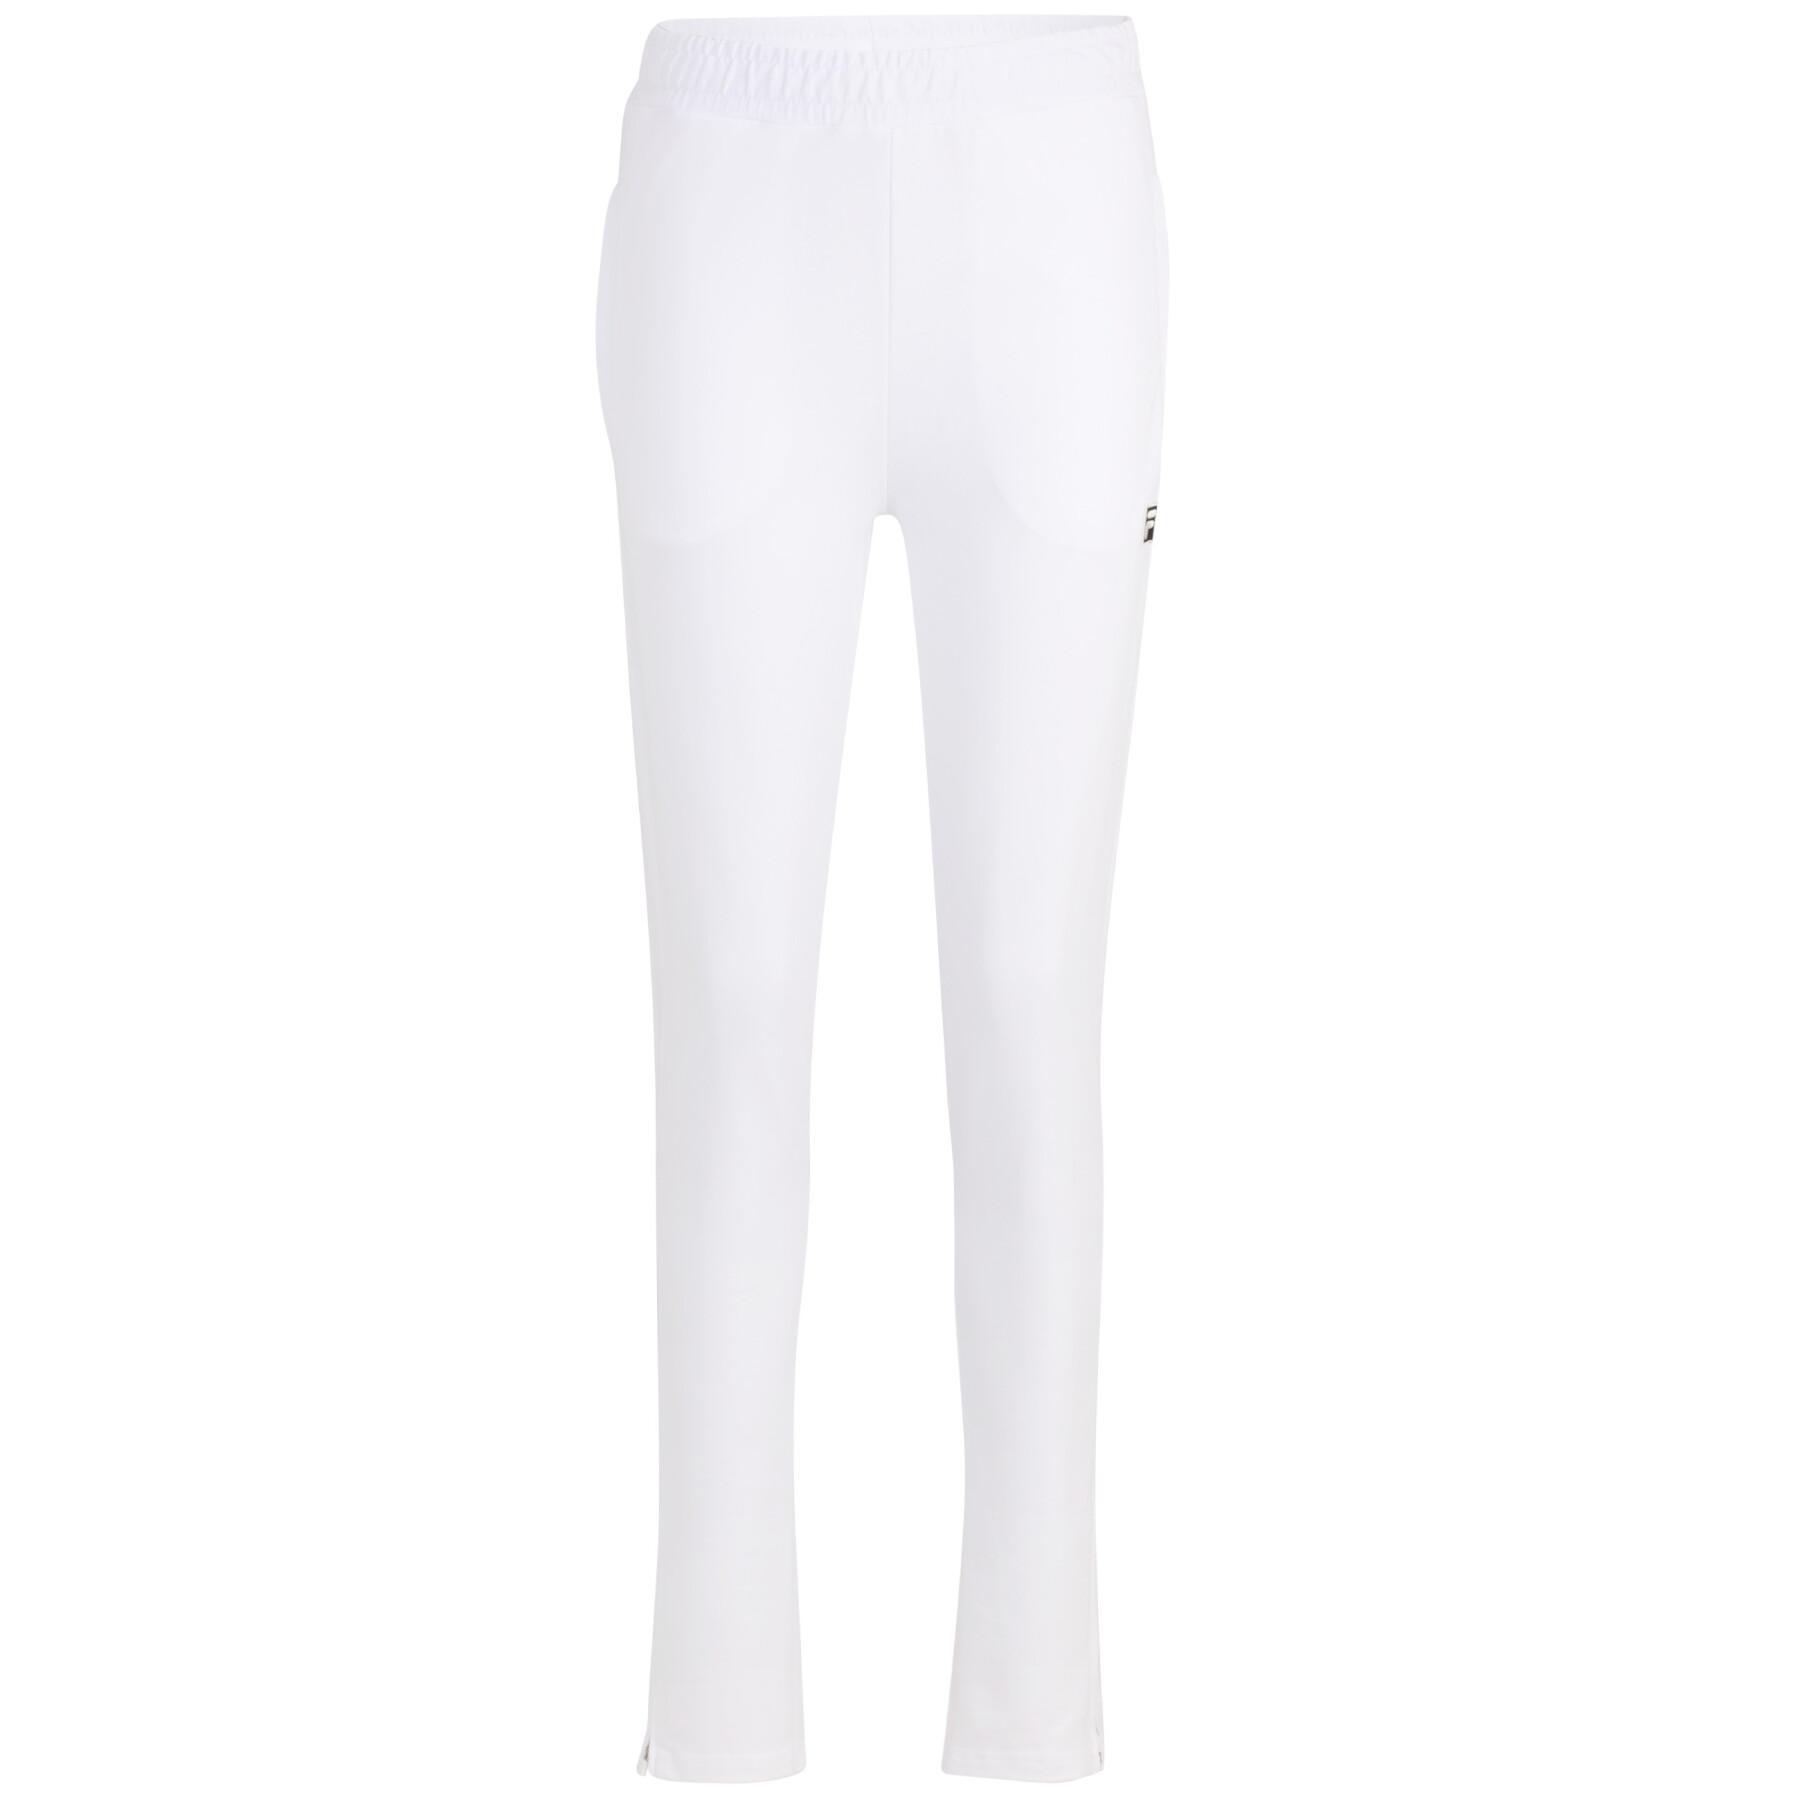 Fila Sport Women's Pants On Sale Up To 90% Off Retail